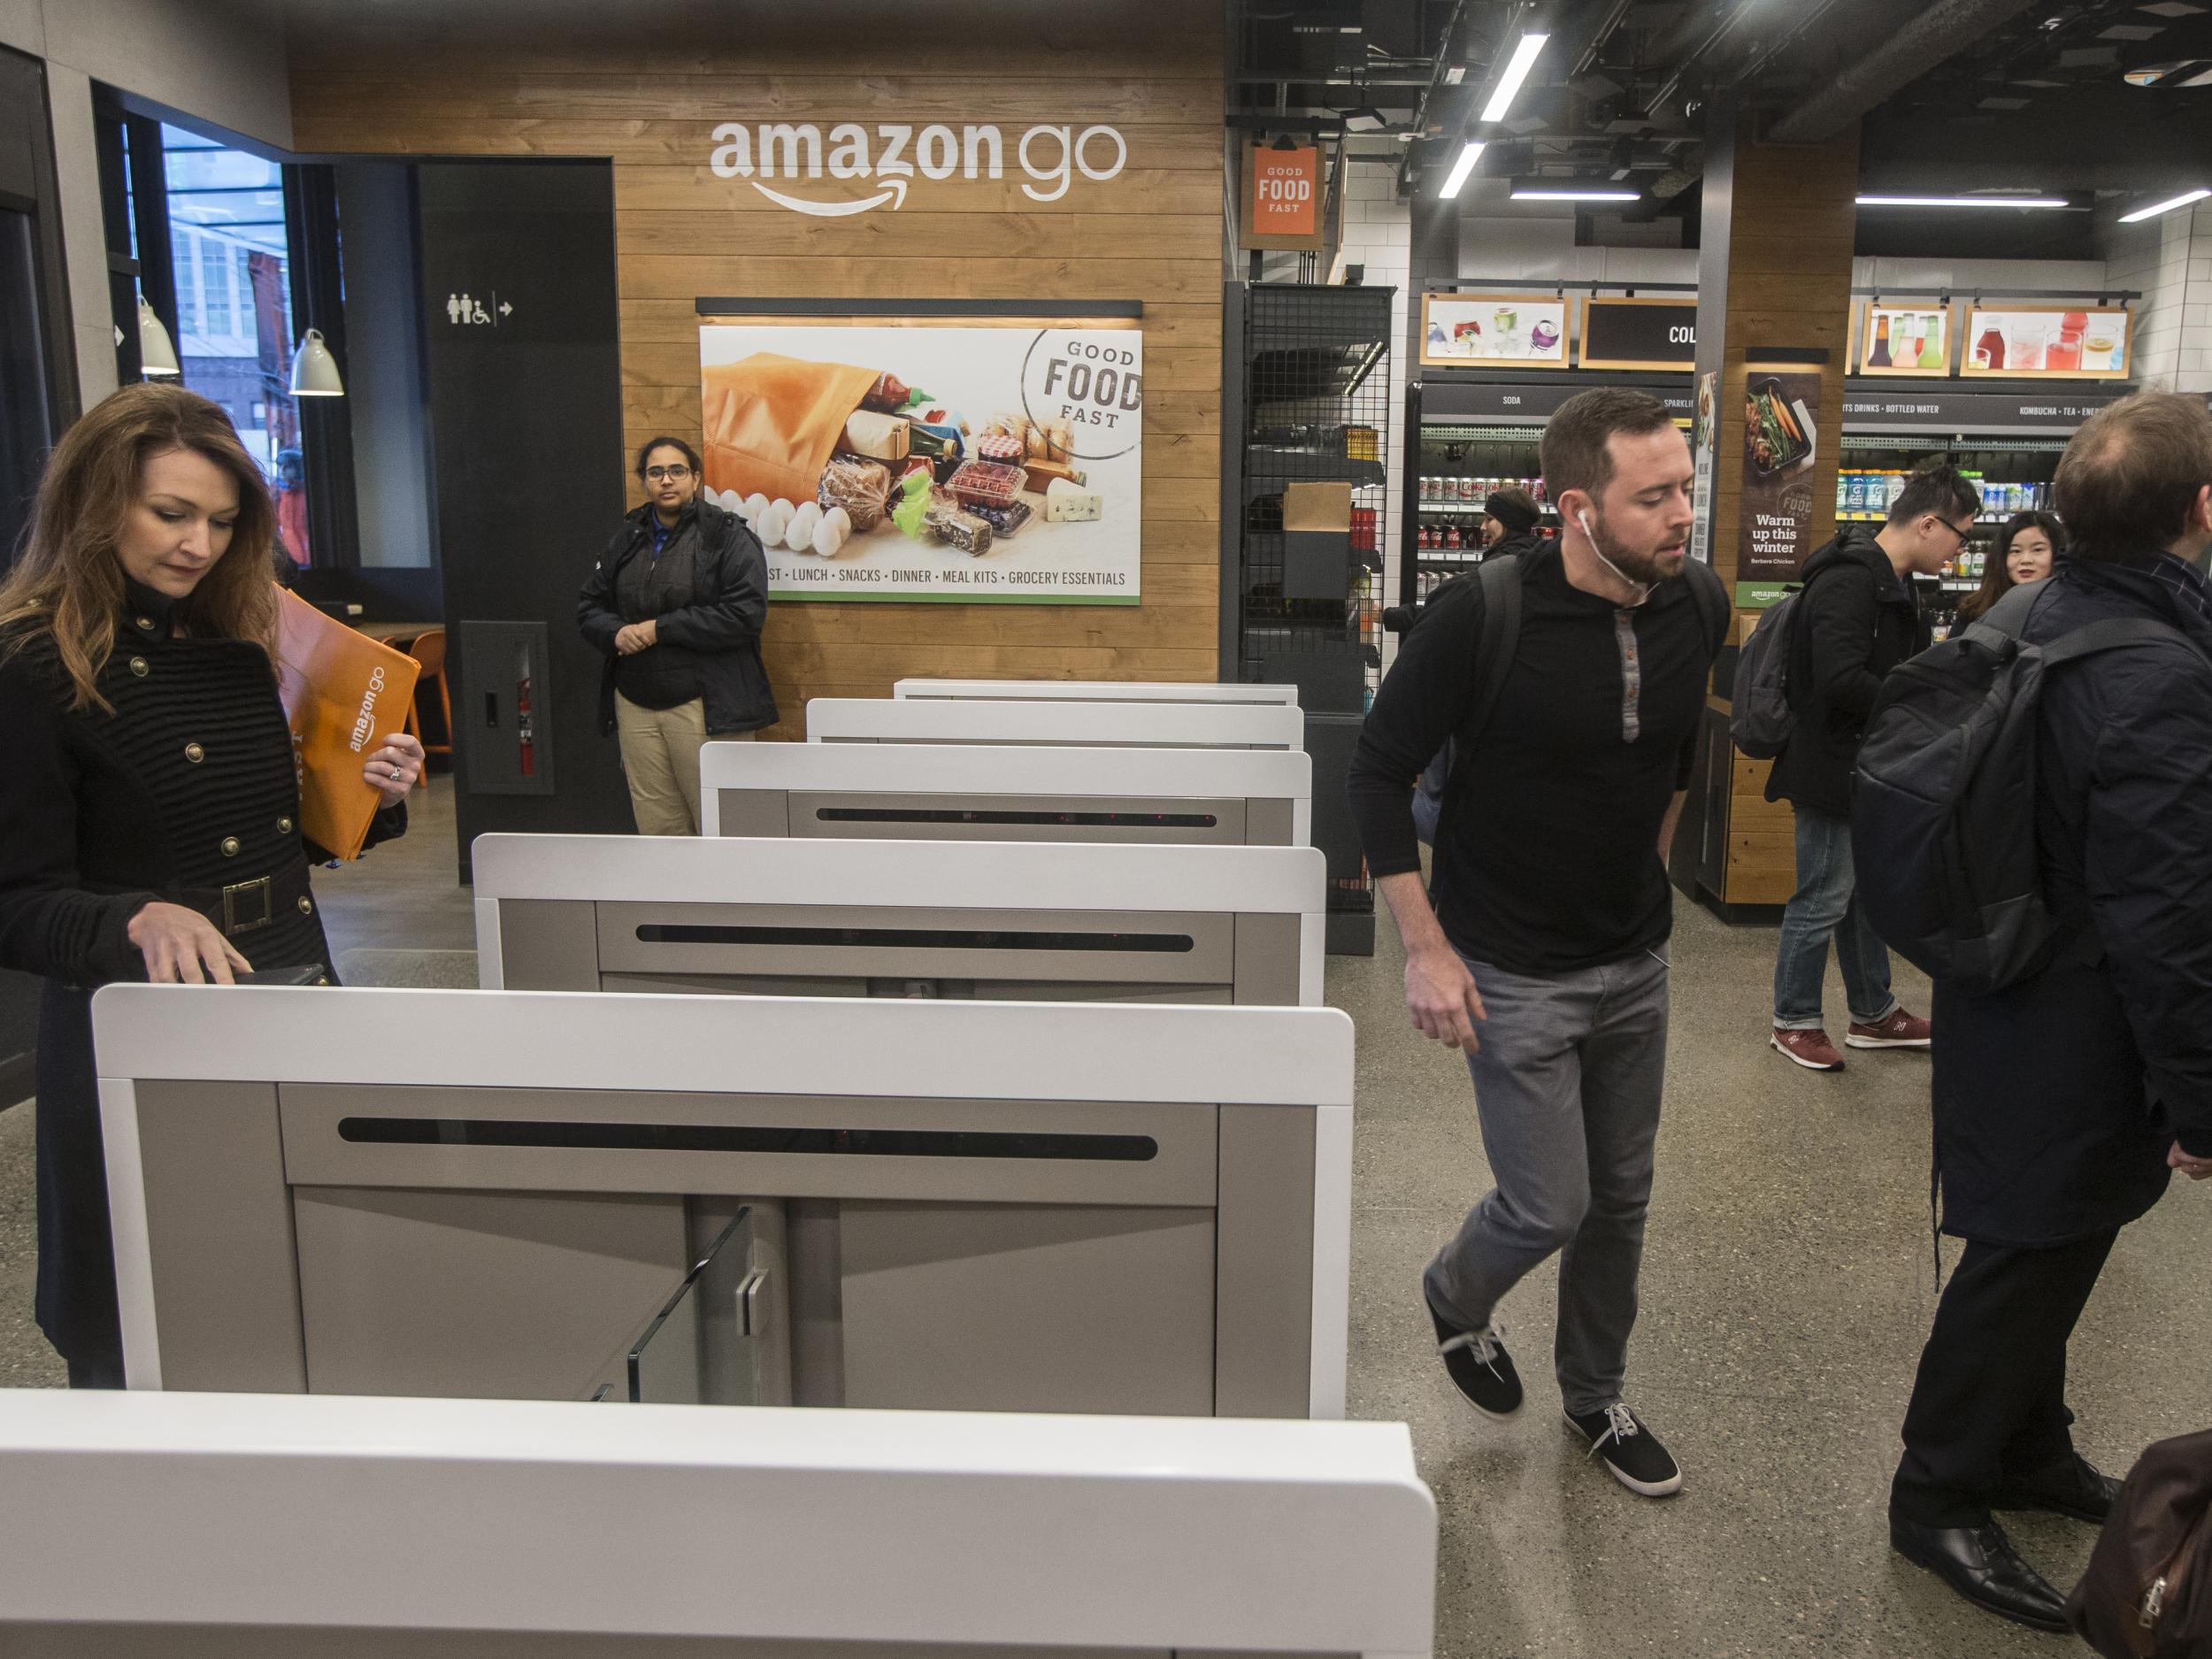 Amazon unveiled technology that will let shoppers grab shopping without having to scan and pay for them